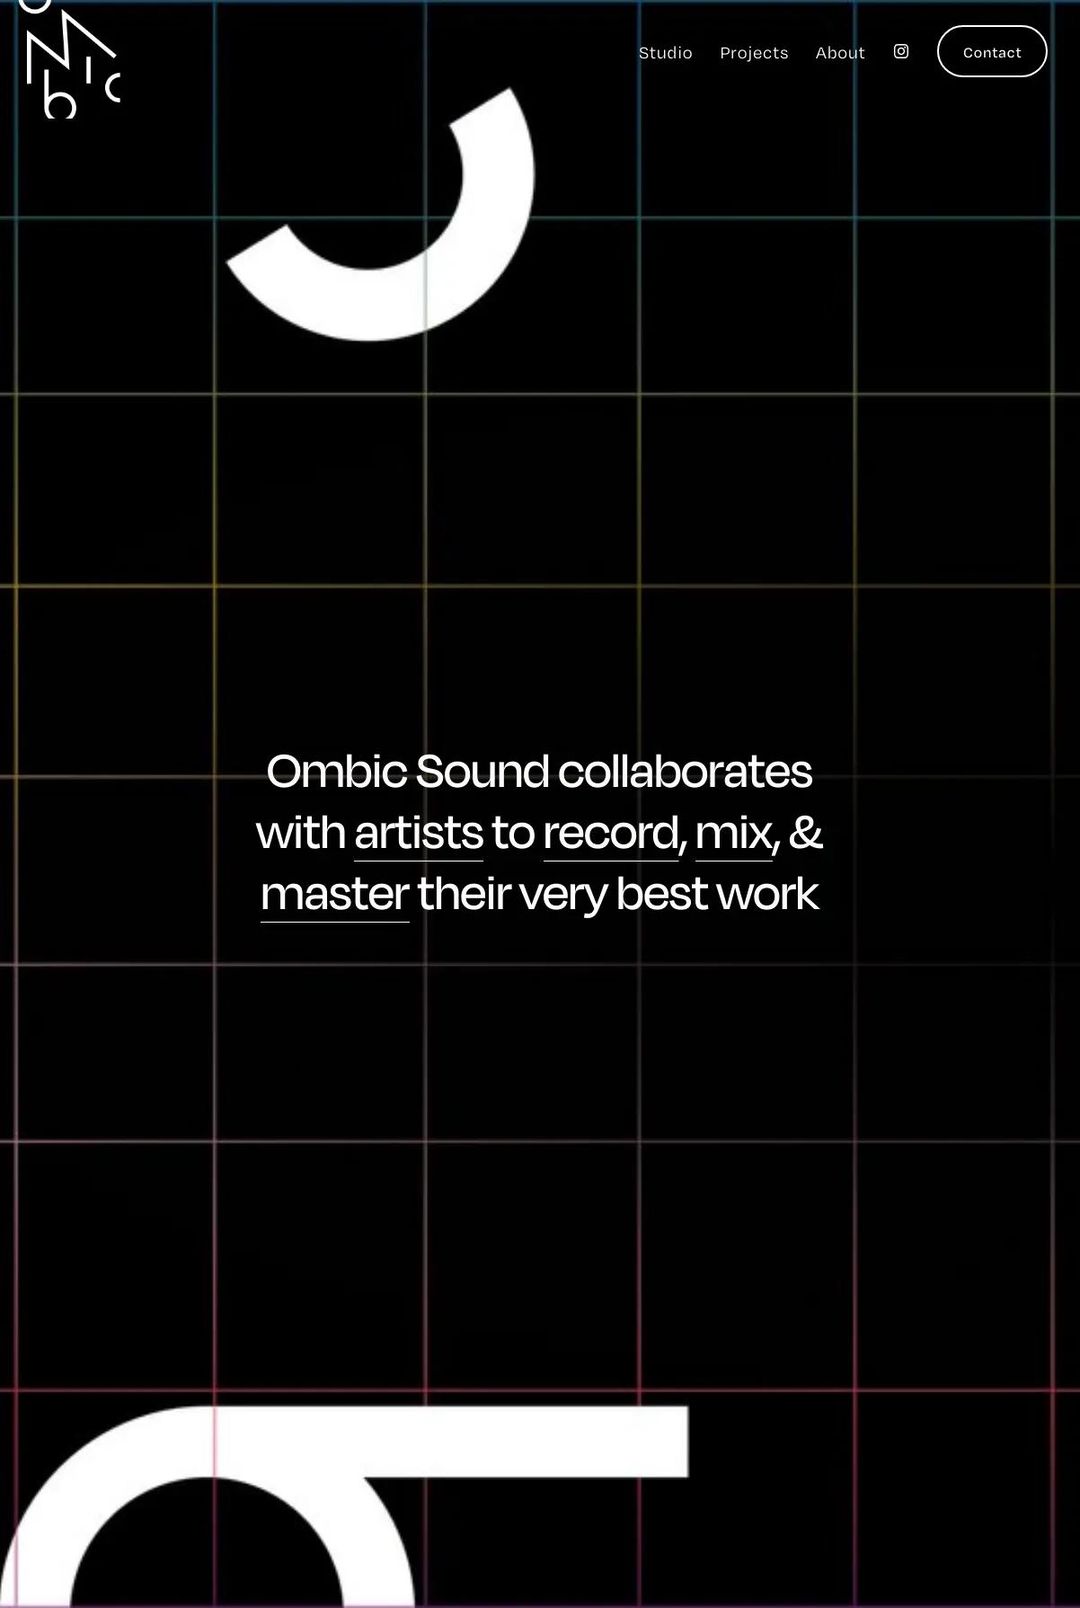 Screenshot 1 of Ombic Sound (Example Squarespace Music Producer Website)